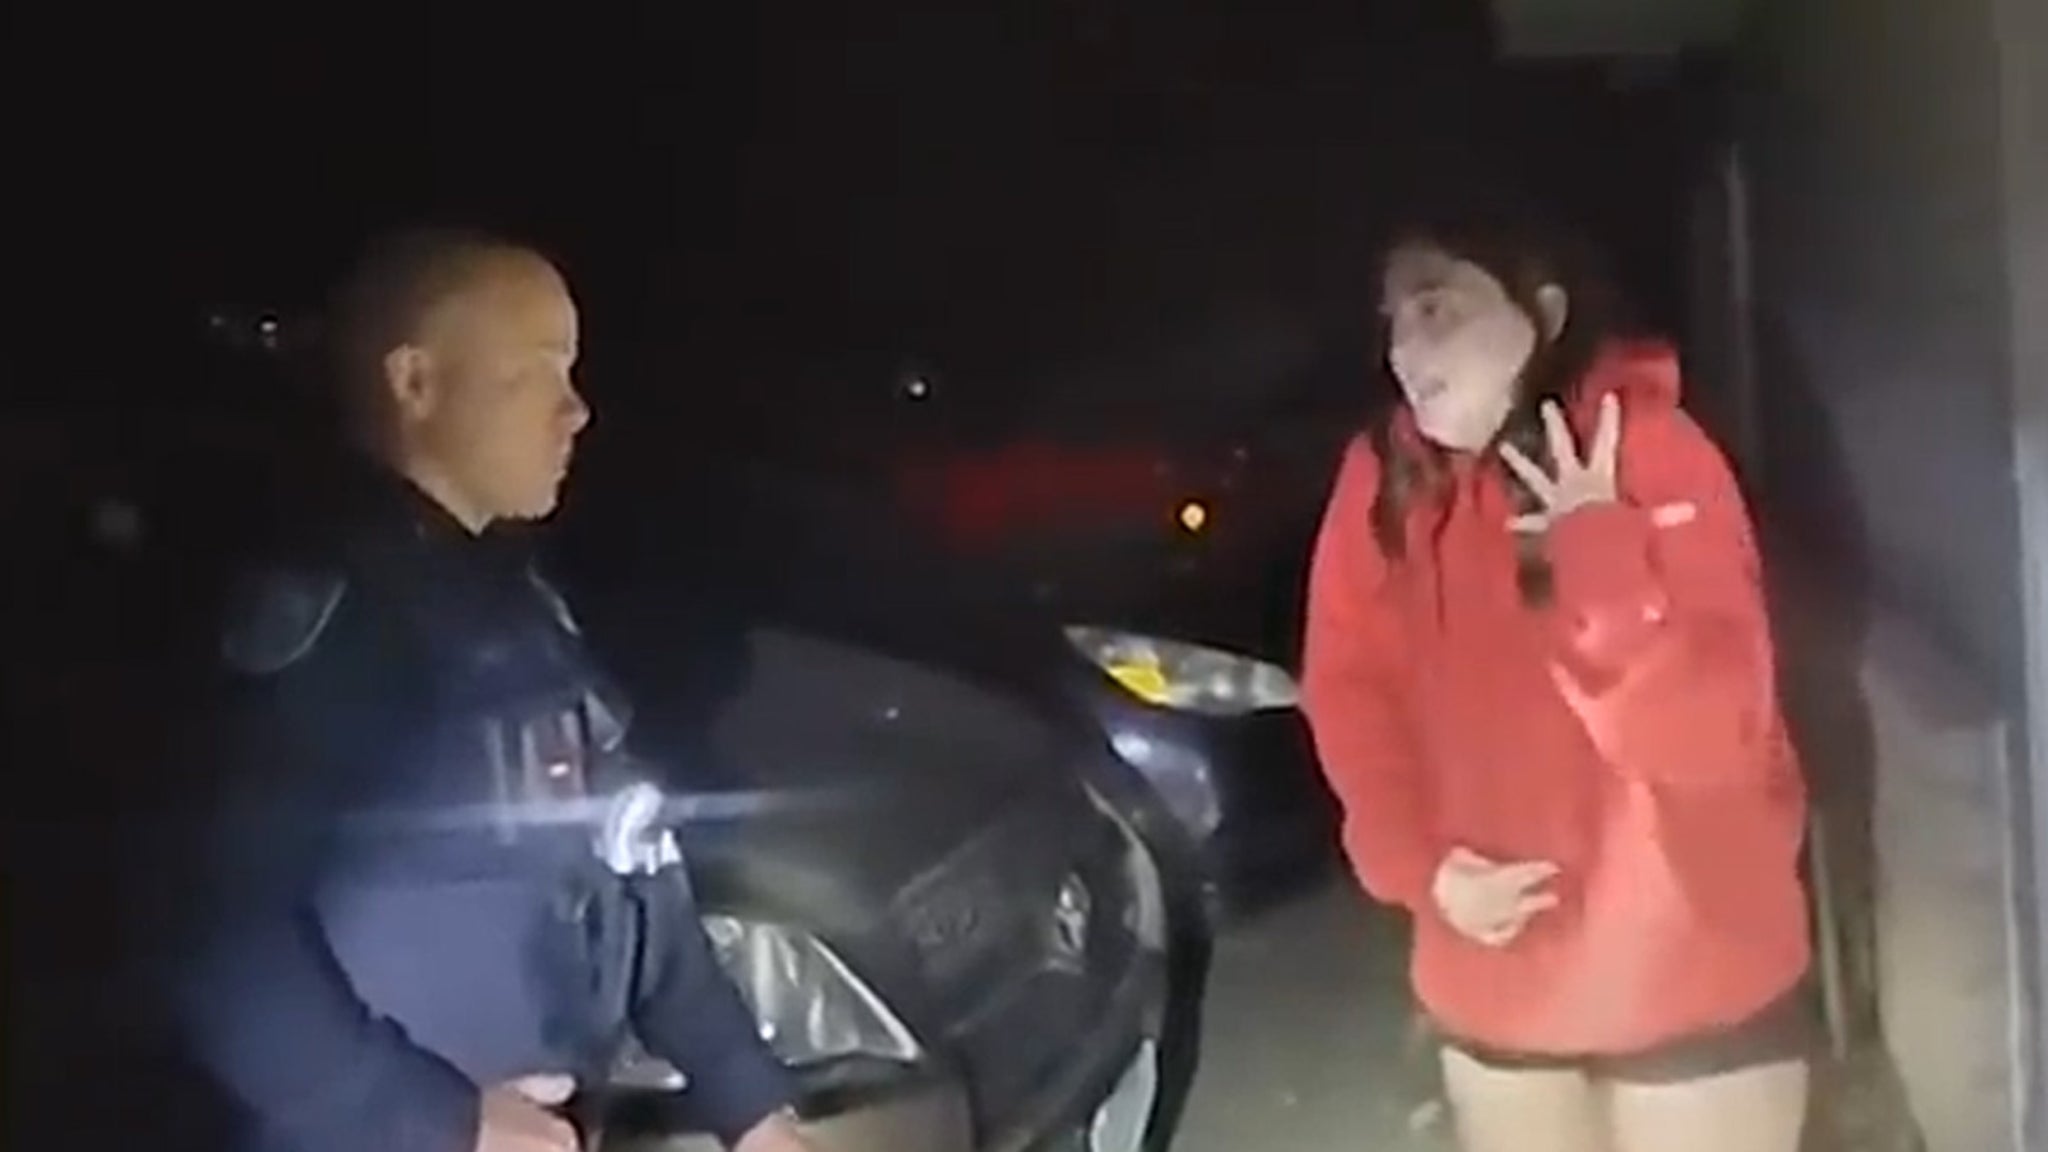 Idaho Murder Victim Talking to Cop After Noise Complaint, New Video with Tie to Case